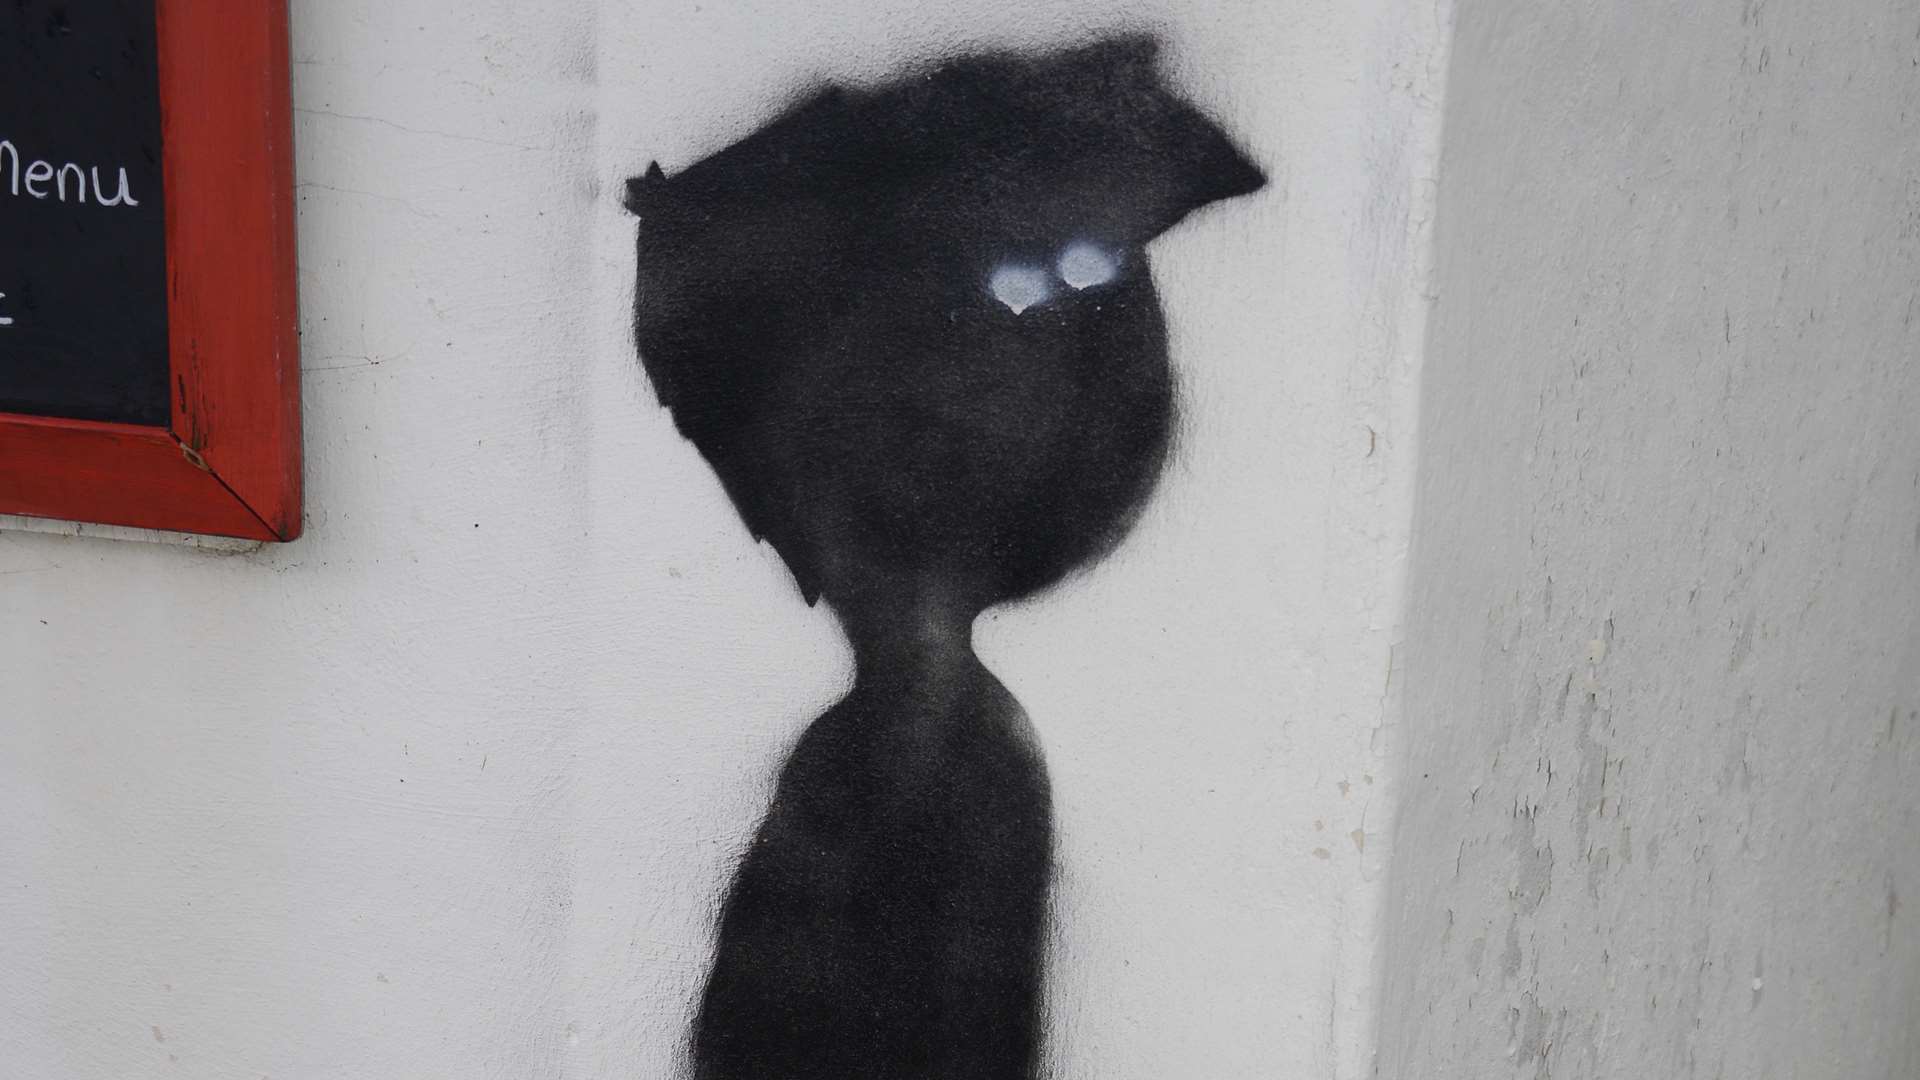 The stencil image of a boy found at Greatstone - is it a Banksy?